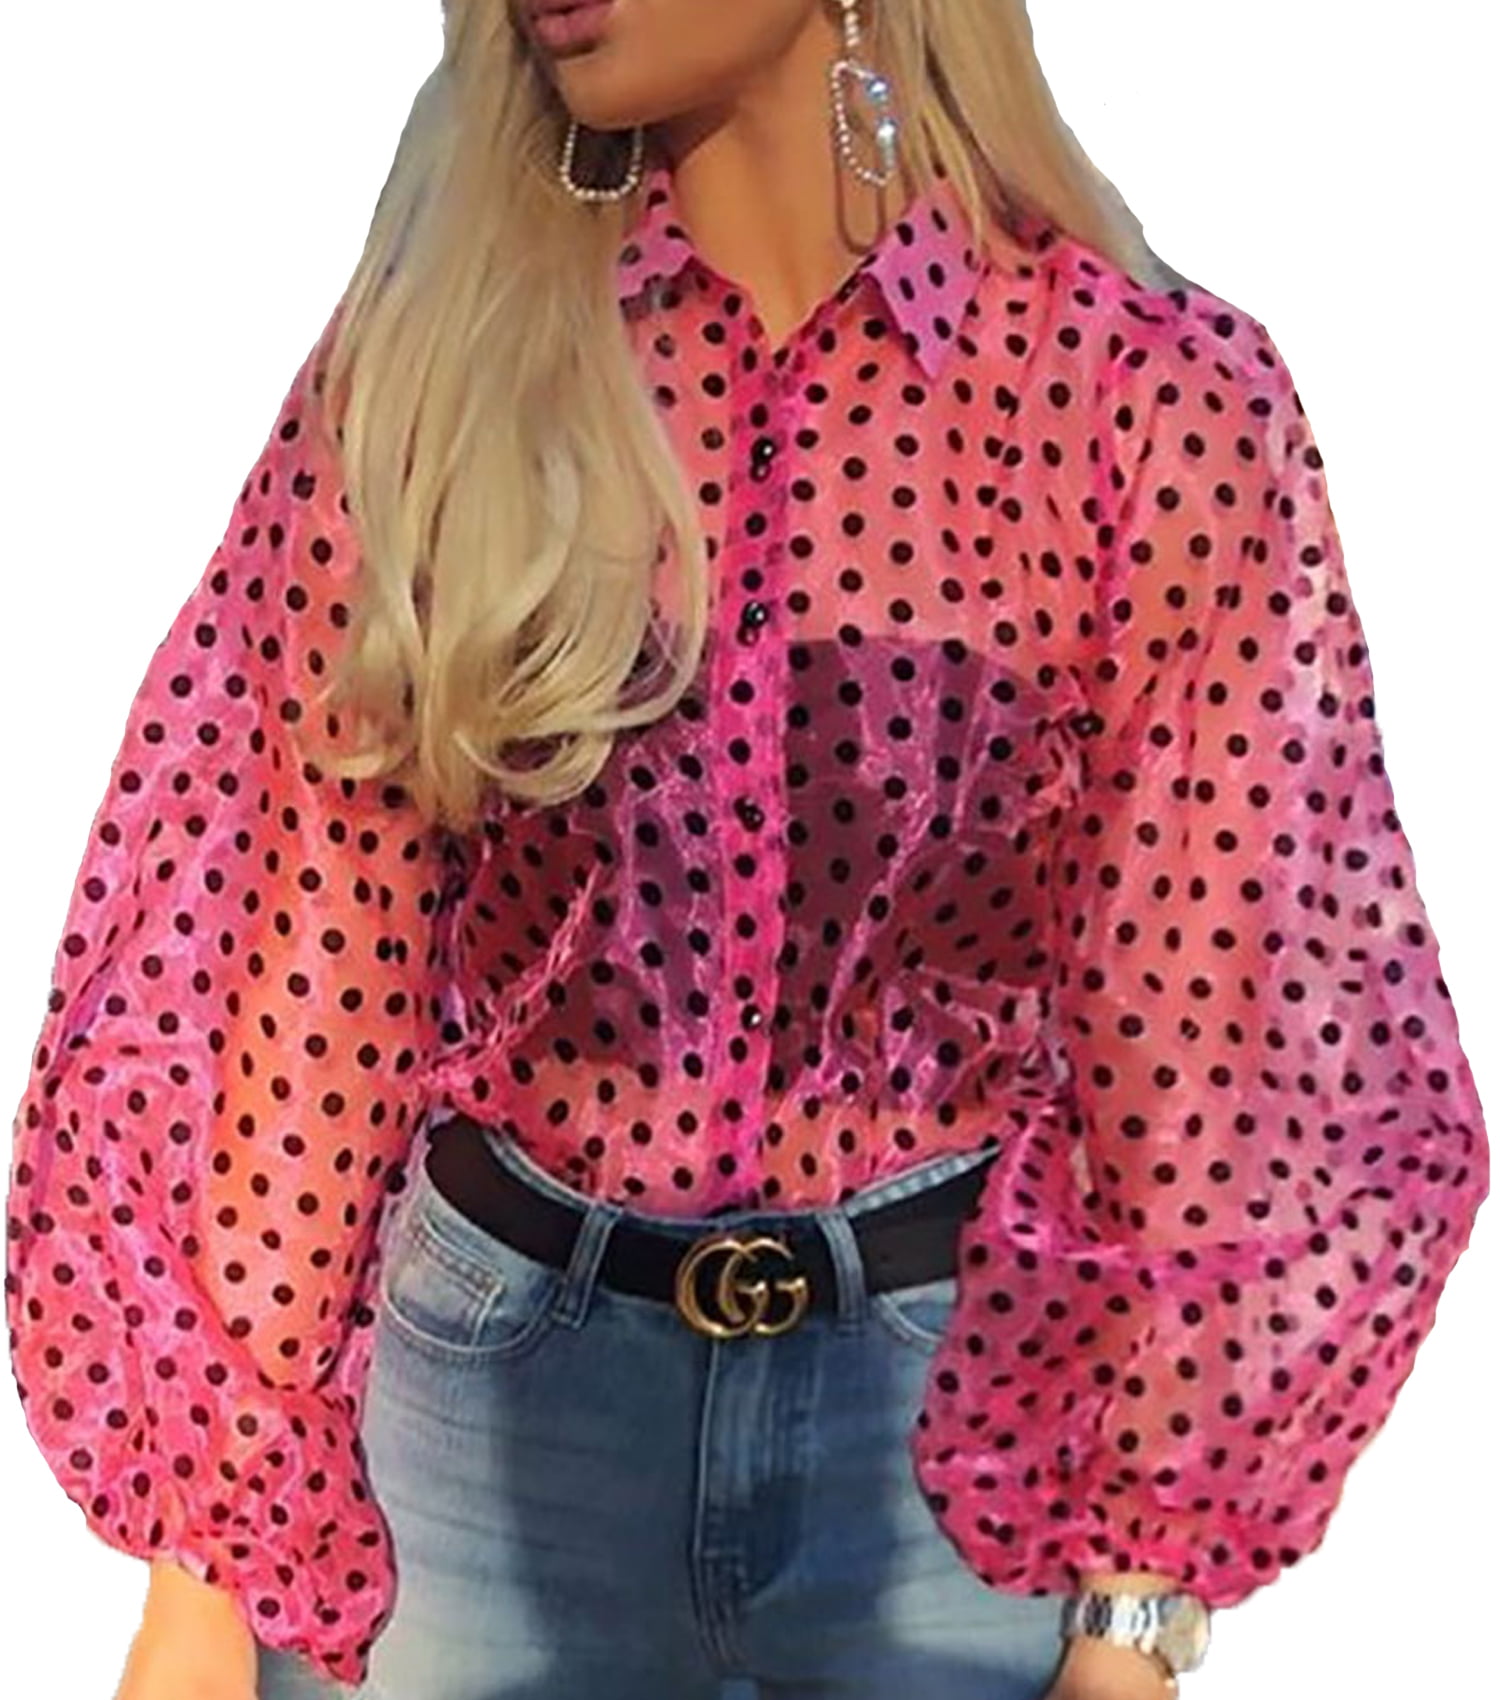 Pink Off The Shoulder Top Juniors Blouse Puff Sleeves Small Medium Large S M L